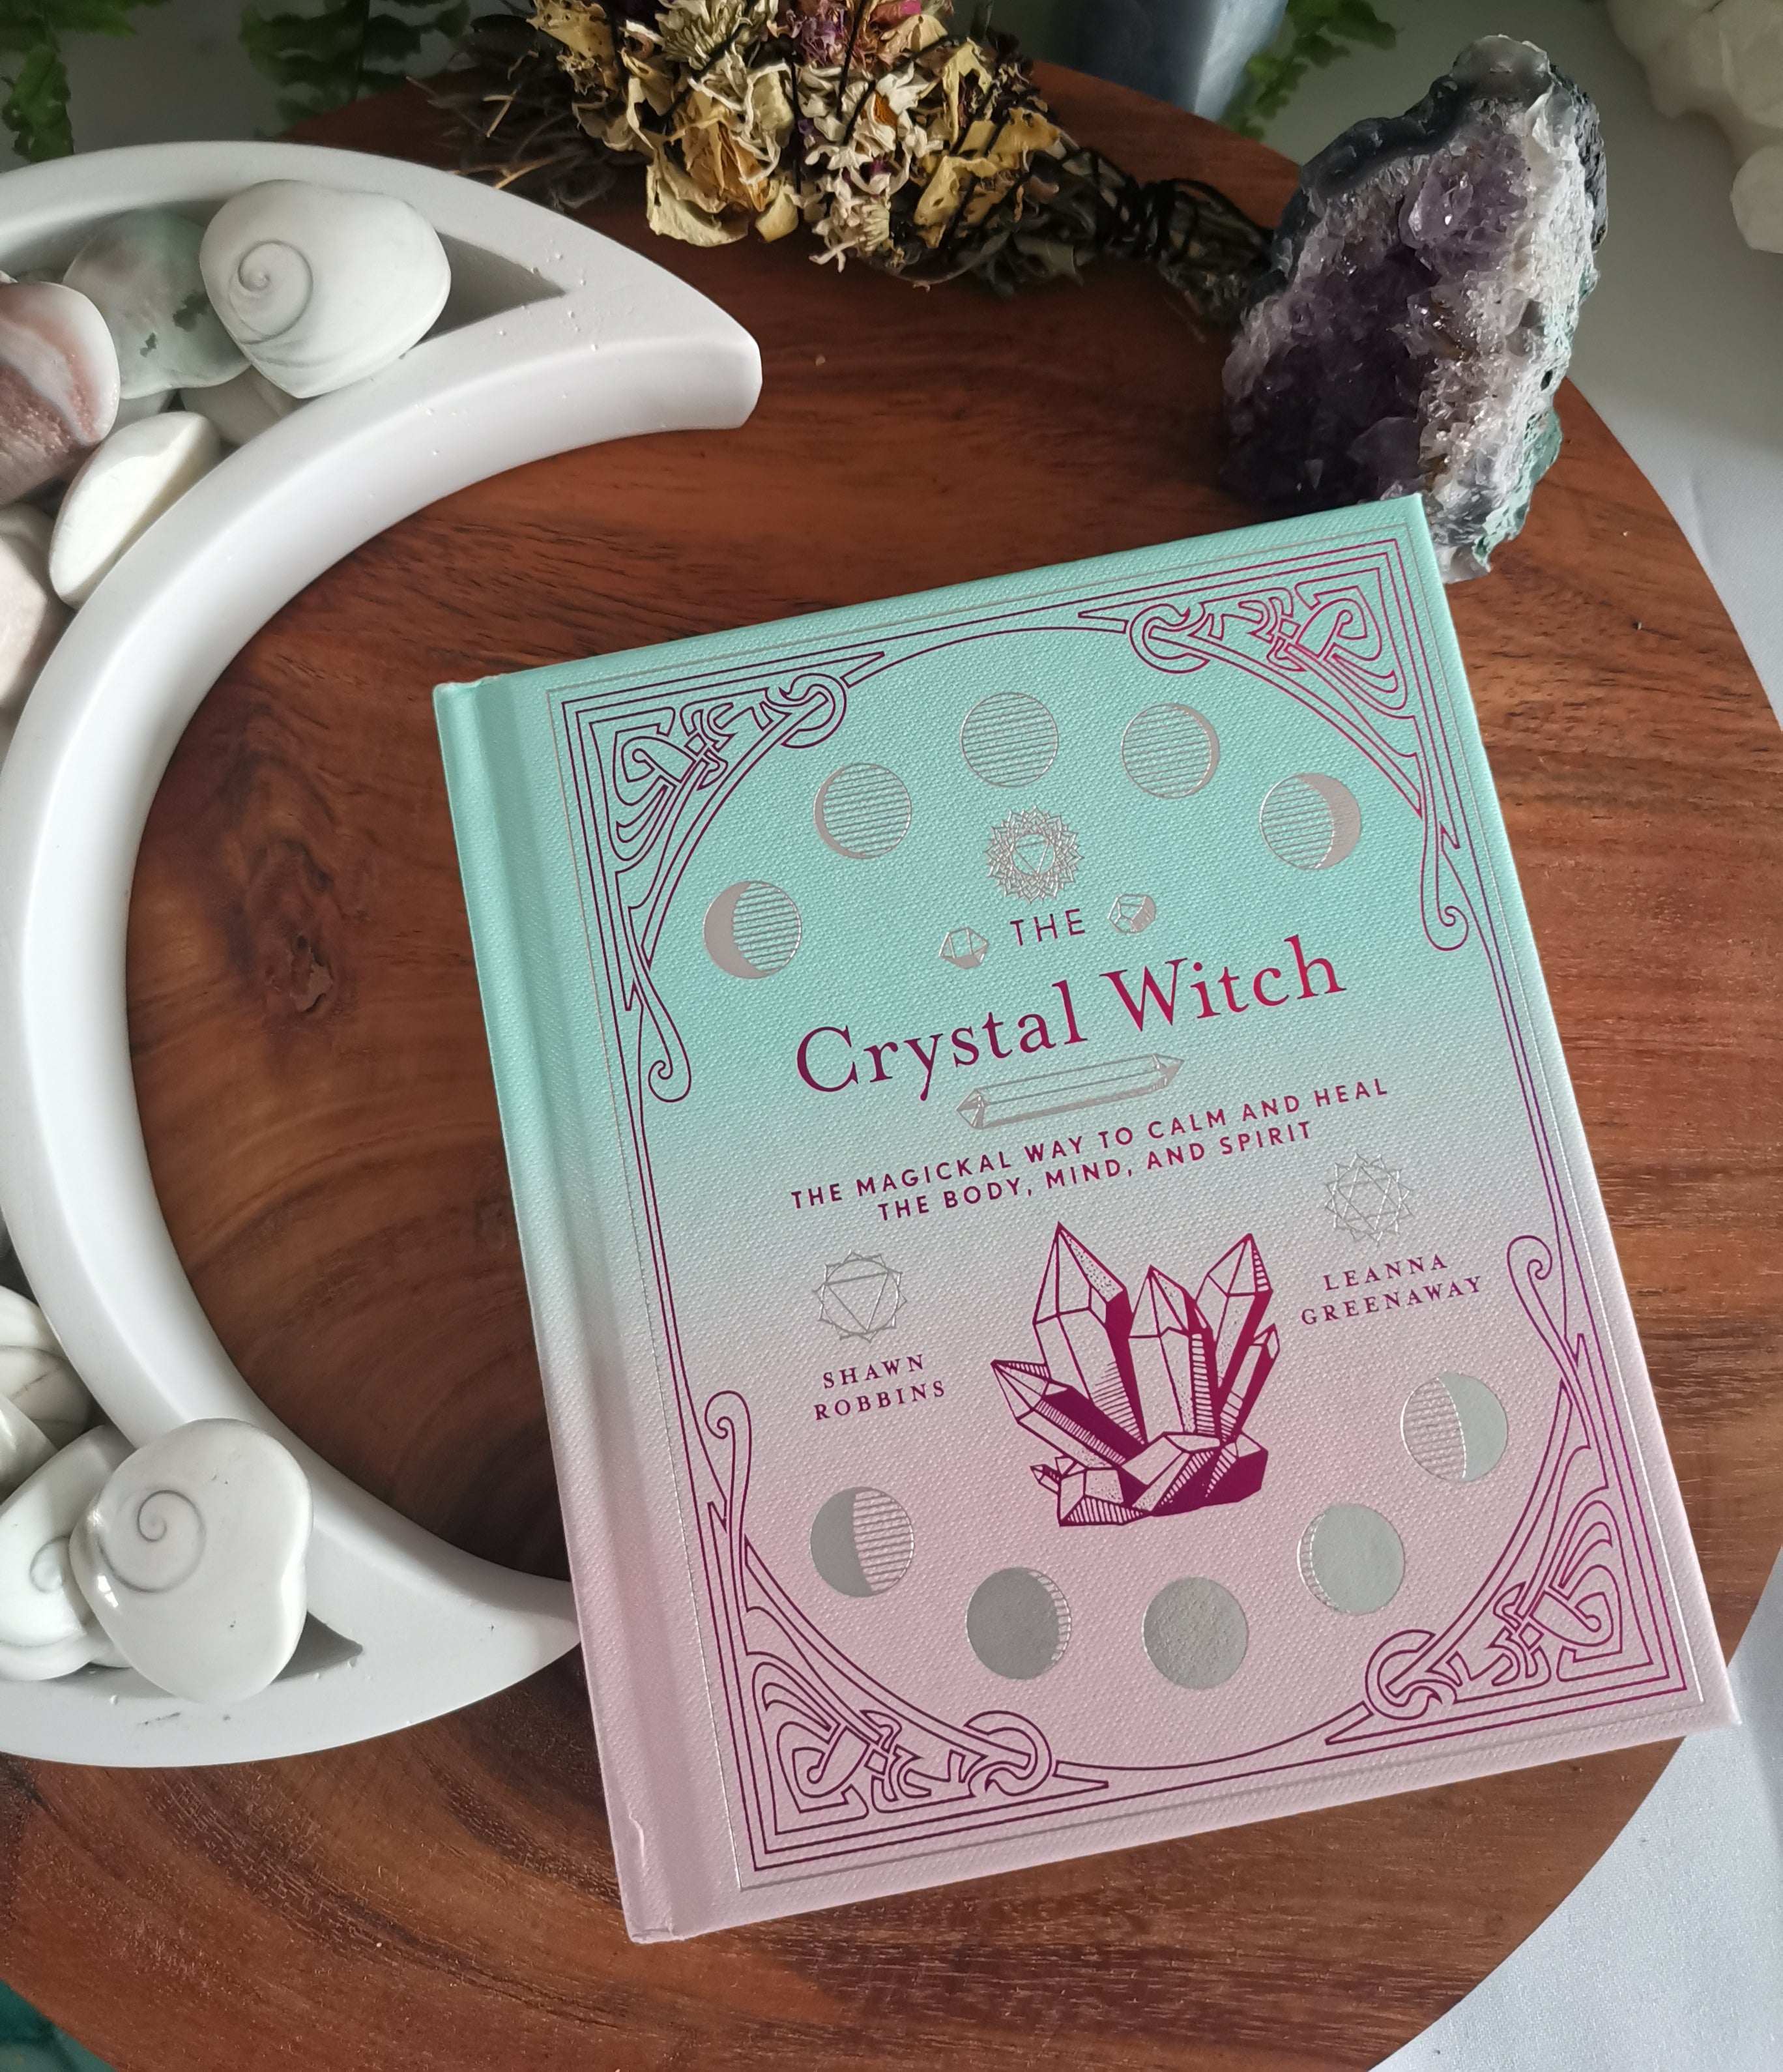 The Crystal Witch - Shawn Robbins and Leanna Greenway